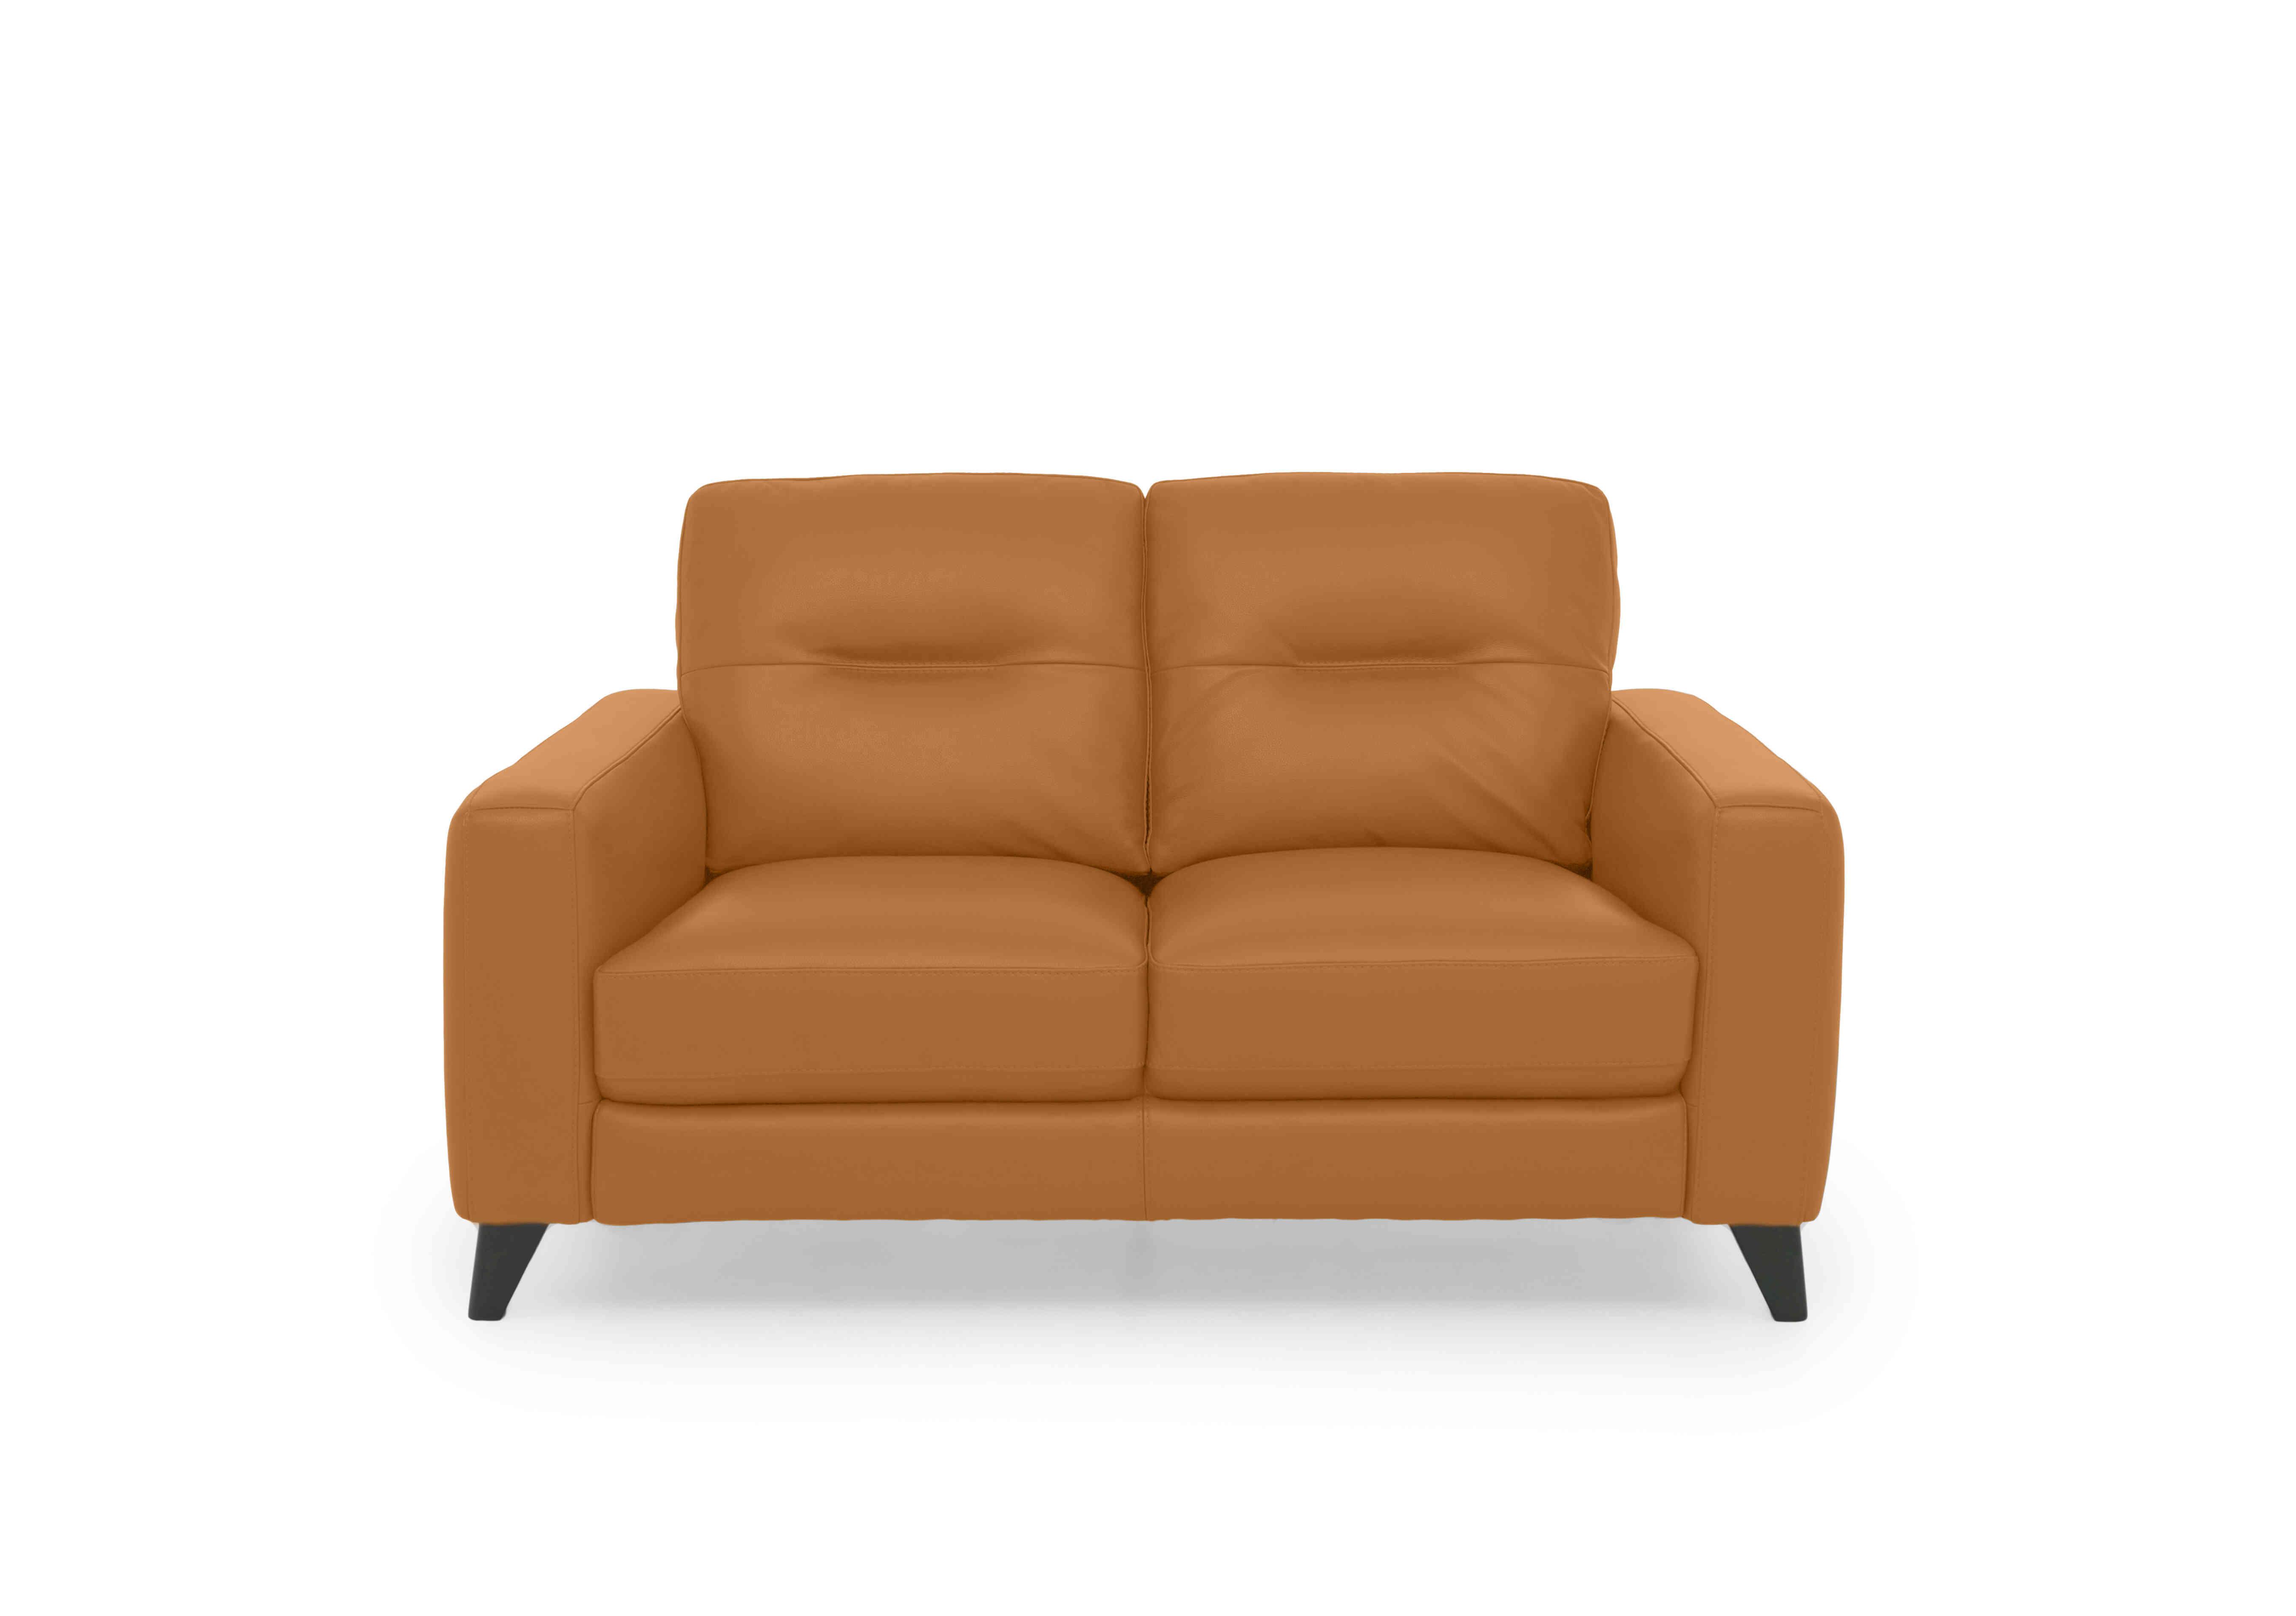 Jules 2 Seater Leather Sofa in Bv-335e Honey Yellow on Furniture Village